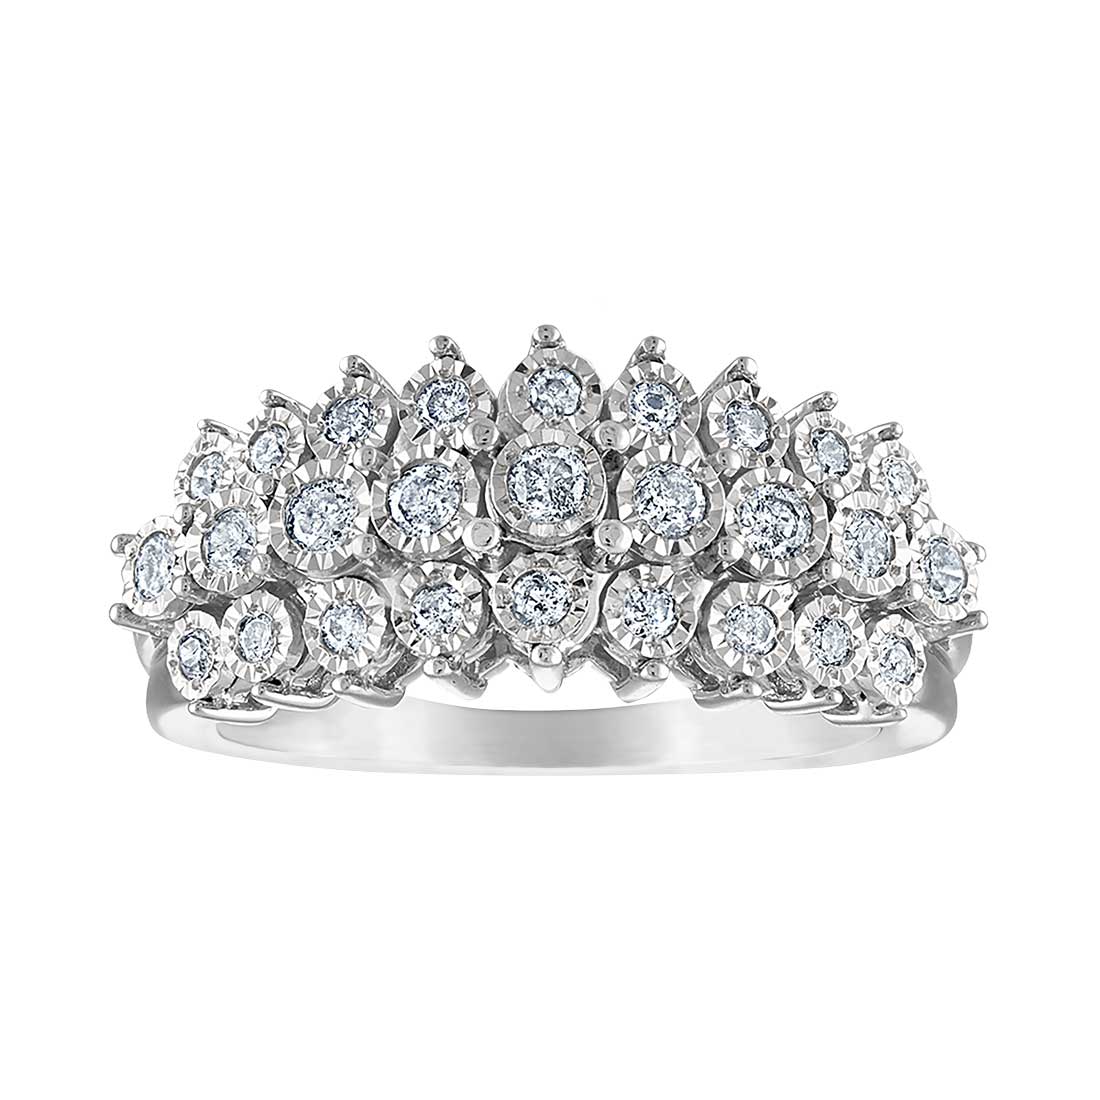 Miracle Dress Ring with 1/2ct of Diamonds in Sterling Silver Rings Bevilles 